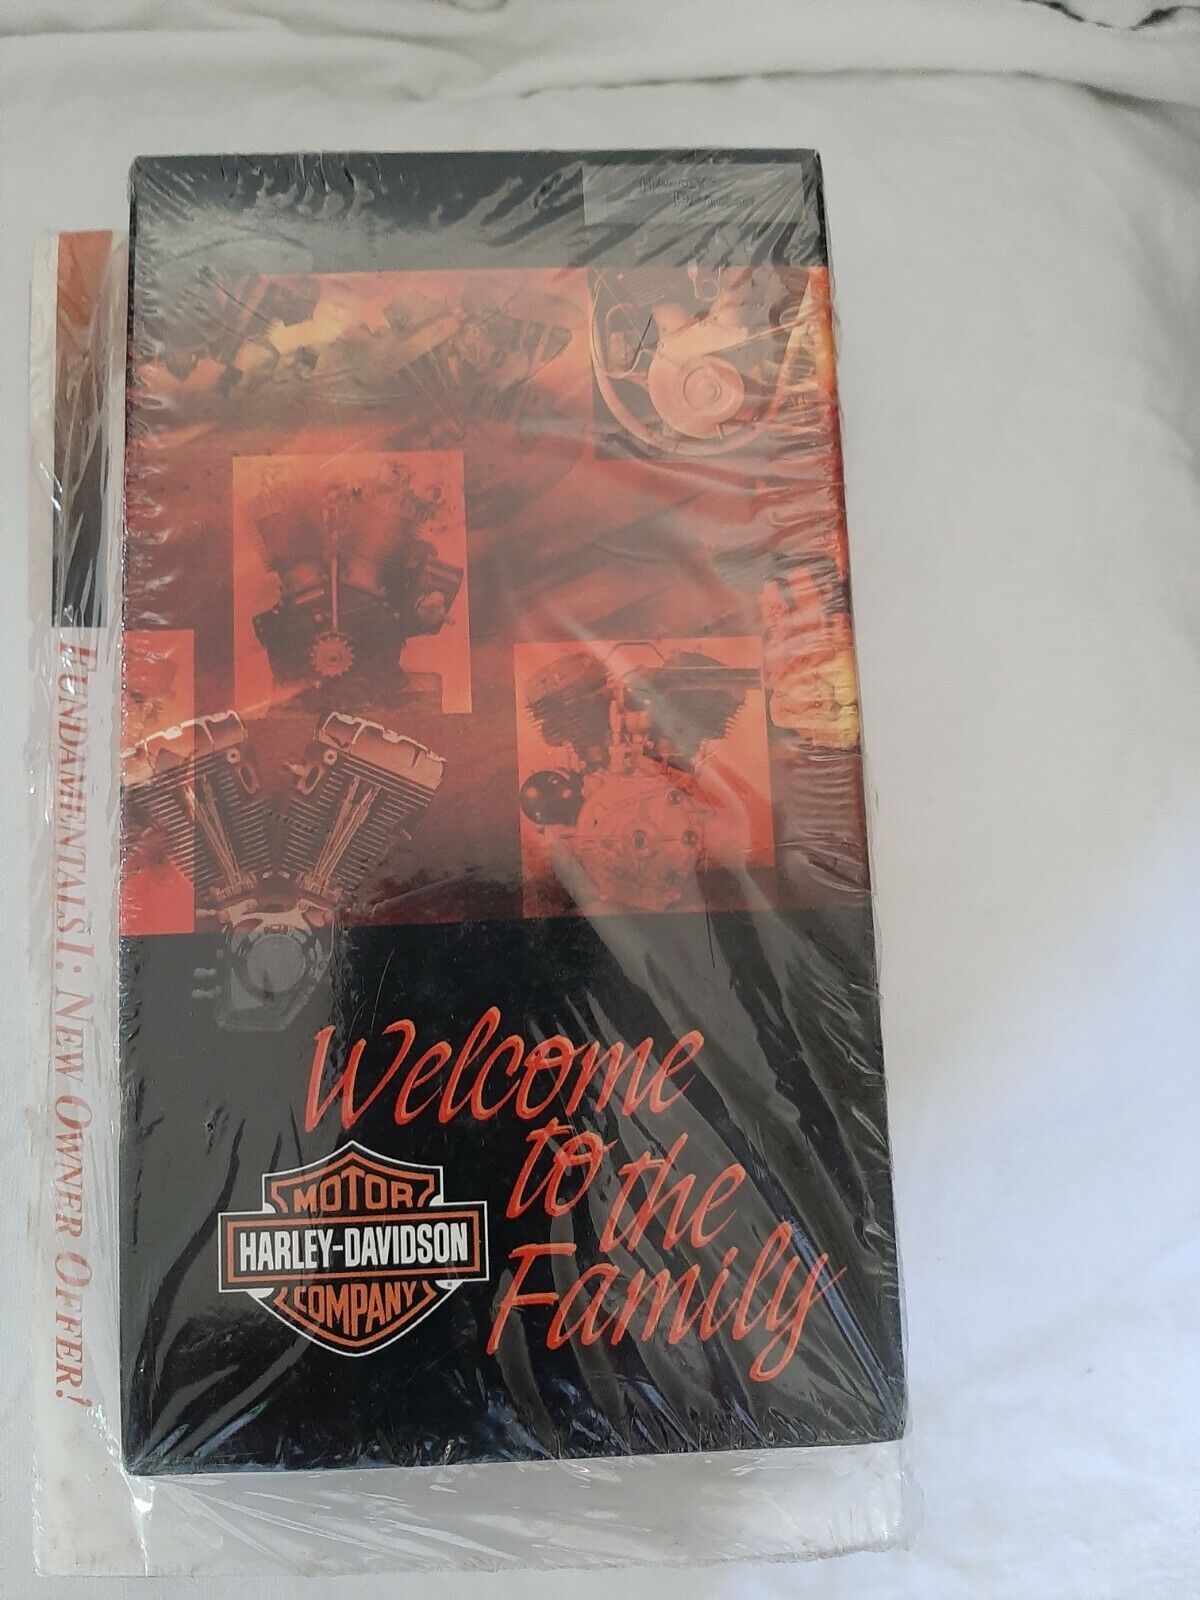 Vintage Welcome To The Family Harley - Davidson New Vhs Tape Manuels In Package 